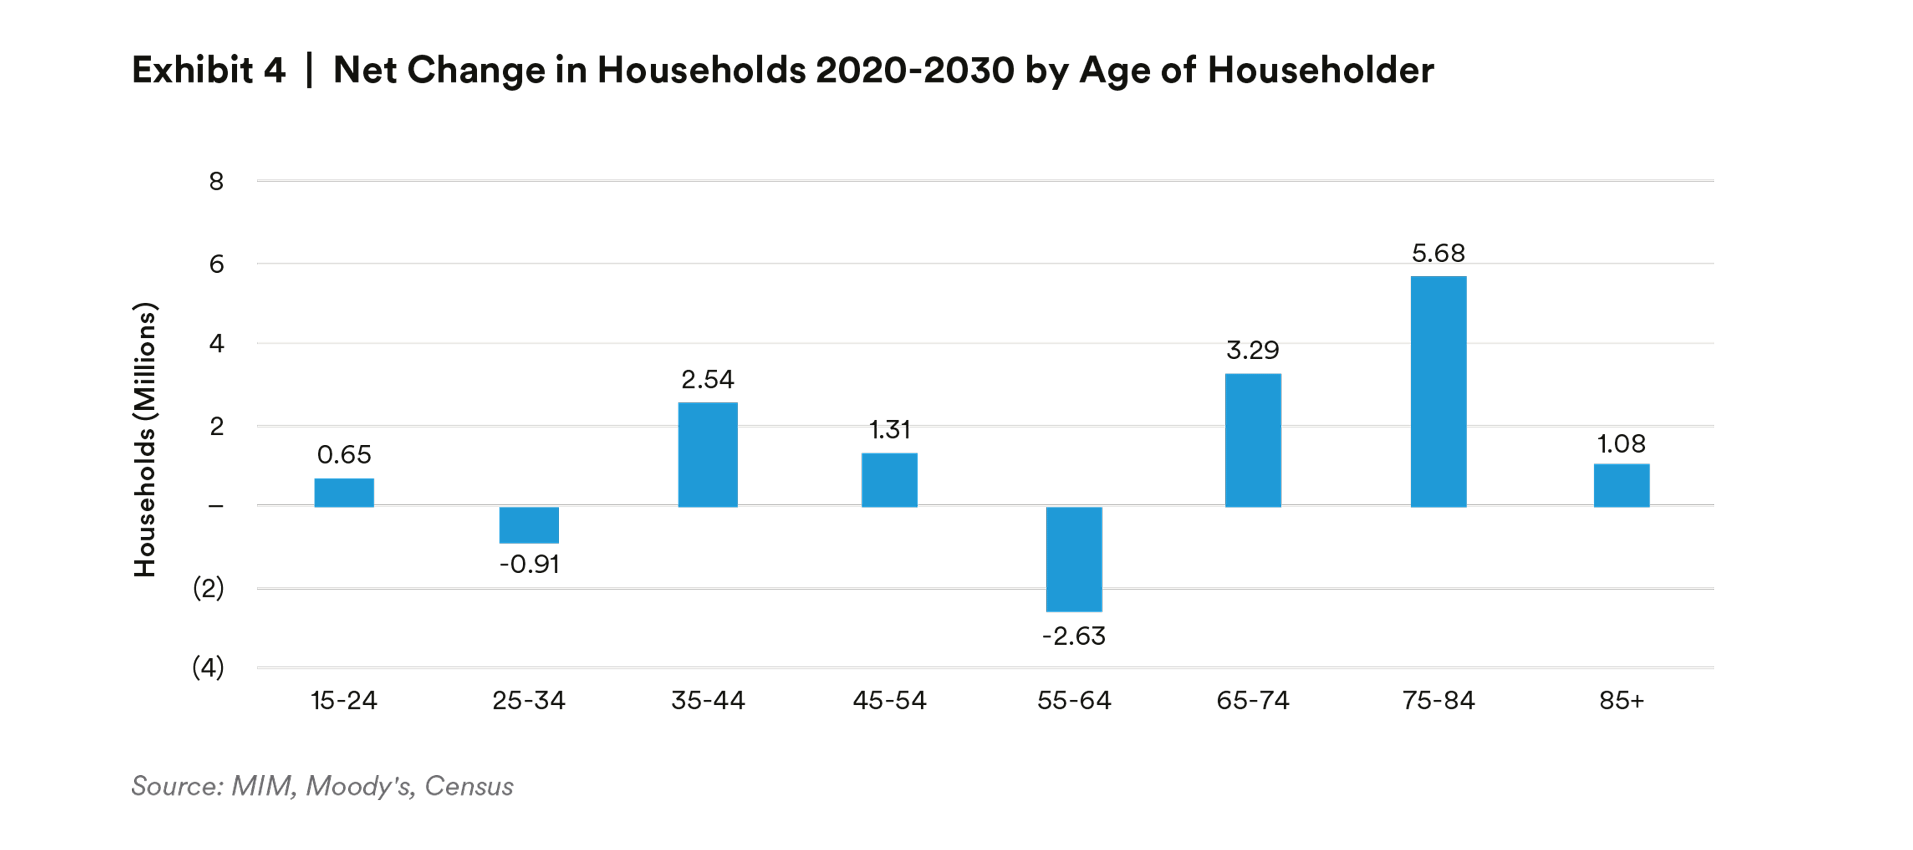 /></figure><!-- /wp:image --><!-- wp:paragraph --><p>Aging Millennials and Baby Boomers are both facing their own versions of financial challenges. Millennials continue to contend with elevated student debt burdens and lack of savings. The median student loan debt among home buyers aged 31-40 is $33,000, and nearly 70% of homebuyers say debt is delaying homeownership. At the same time, we estimate the average down payment requirement has nearly doubled between 2010 and 2020.<sup>8</sup> This suggests Millennials may continue to rent for longer than prior generations.</p><!-- /wp:paragraph --><!-- wp:paragraph --><p>On the other end of the population range, Baby Boomers (who will account for a large share of net household formation in the 2020s) are contending with concerns over social security, changes to (and challenges with) pension systems, and lower savings rates, while medical and other household expenses have risen.<sup>9</sup> Uncertainty about their standard of living in retirement has partially driven a rise in rentership among the older generation, who may use home equity to unlock retirement funds.</p><!-- /wp:paragraph --><!-- wp:paragraph --><p>Although it was difficult to foresee the demand increase resulting from the pandemic and work-from-home space needs, the wave of millennials becoming parents and aging Baby Boomers was not. In our 2016 whitepaper, Echoing the Boom, we argued investors should begin focusing on larger format housing, including SFR, and that this type of housing could generate the lion’s share of new rental demand during the 2020’s. We continue to believe that to be the case today, but with an added boost of single and non-child household seeking more space.</p><!-- /wp:paragraph --><!-- wp:paragraph --><p><strong>Supply of new housing</strong></p><!-- /wp:paragraph --><!-- wp:paragraph --><p>Although we believe 11 million new households will be formed over the next decade, that is only part of the story. The evolving supply of housing units is another factor, and supply does not simply mean new construction. Based on a number of factors, including the number of homes that were built before 1950 that are now reaching obsolesce, we estimate 4.5 million apartment units or single-family homes will be demolished during the 2020s (negative supply growth). Marrying this with the 11 million household formations implies there will be demand for a minimum of 15.5 million new housing units during the decade in our view.</p><!-- /wp:paragraph --><!-- wp:paragraph --><p>Adding nearly 16 million housing units would meaningfully outpace the 2010-2020 decade, when only 3.9 million housing units were constructed (exhibit 5), but we believe this base case expectation reflects the realities that define the current housing market.</p><!-- /wp:paragraph --><!-- wp:image {